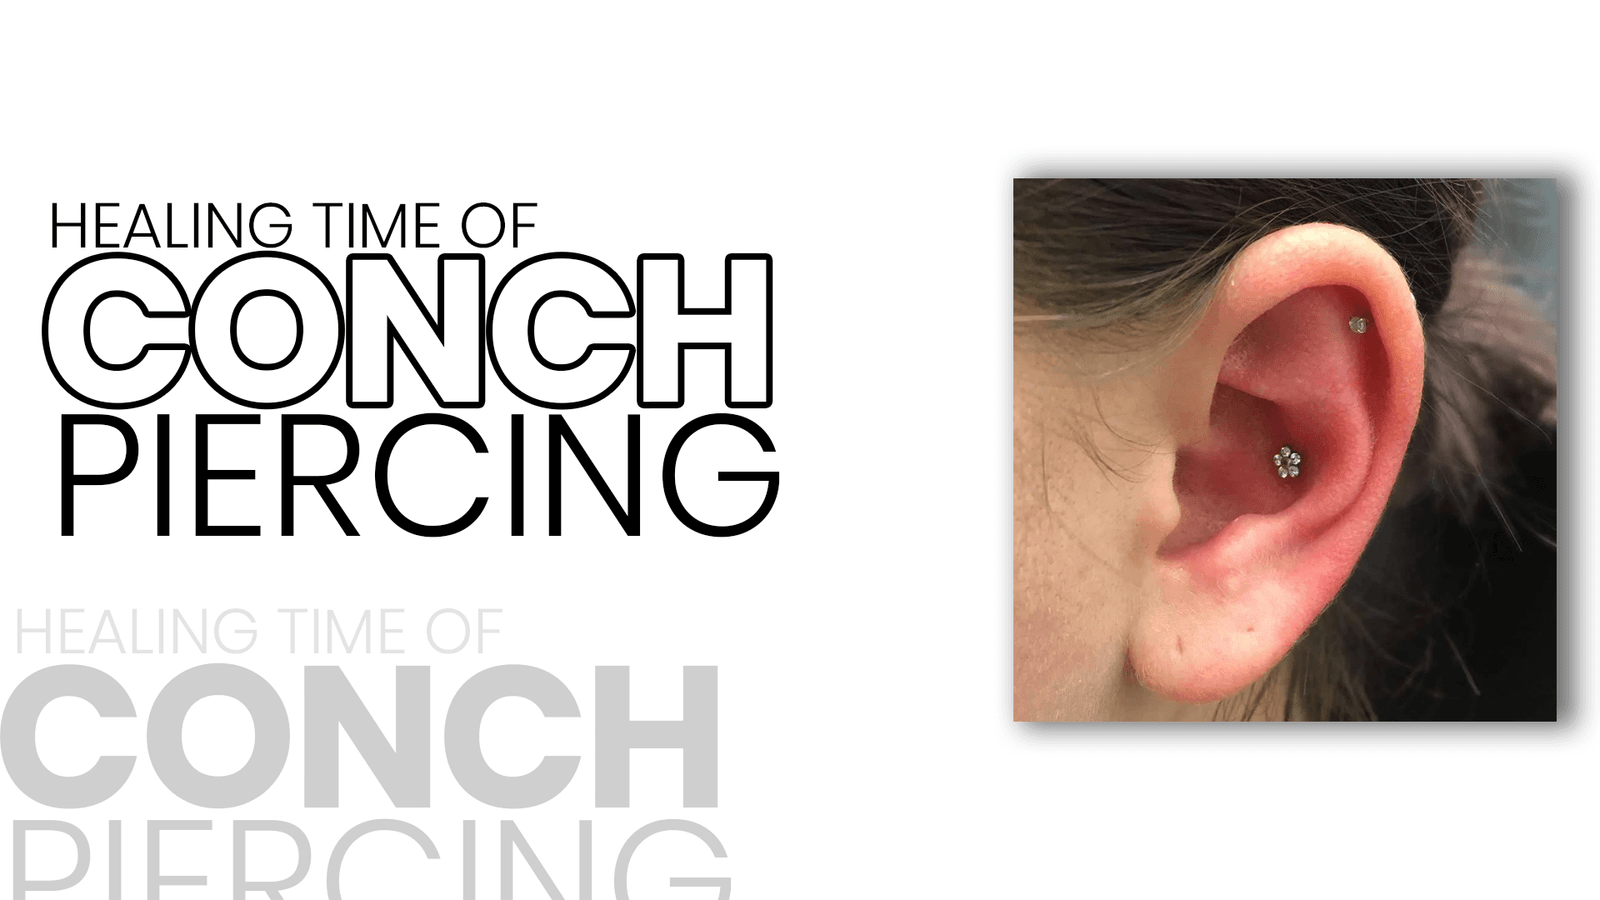 Healing Time of Conch Piercing